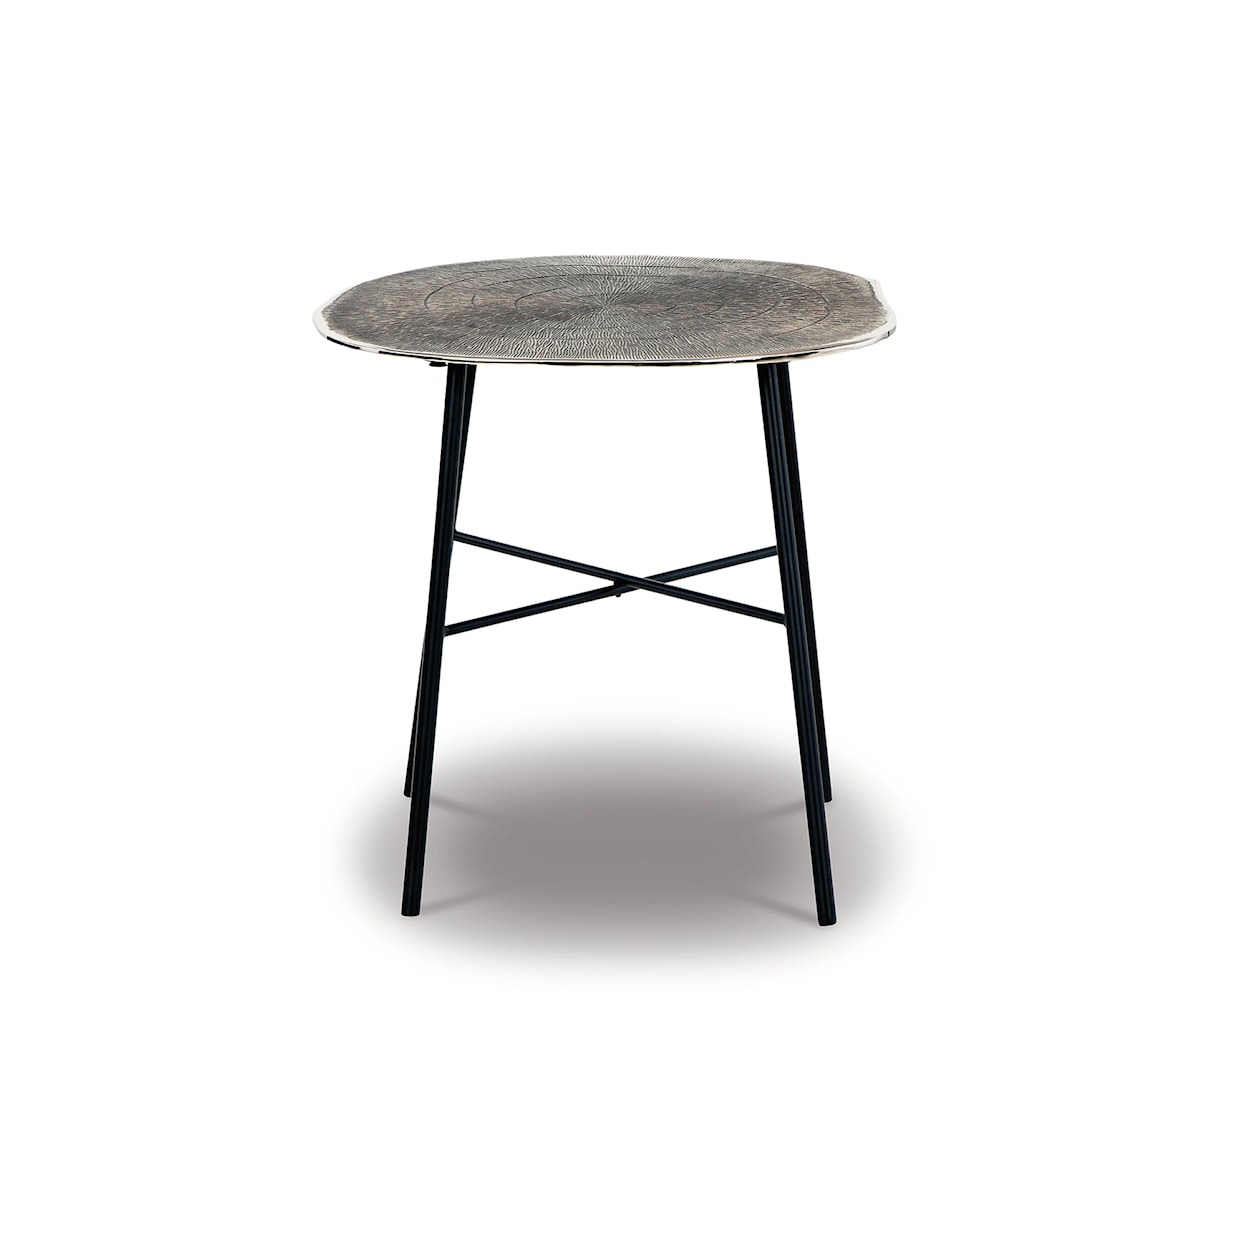 Signature Design by Ashley Laverford Round End Table